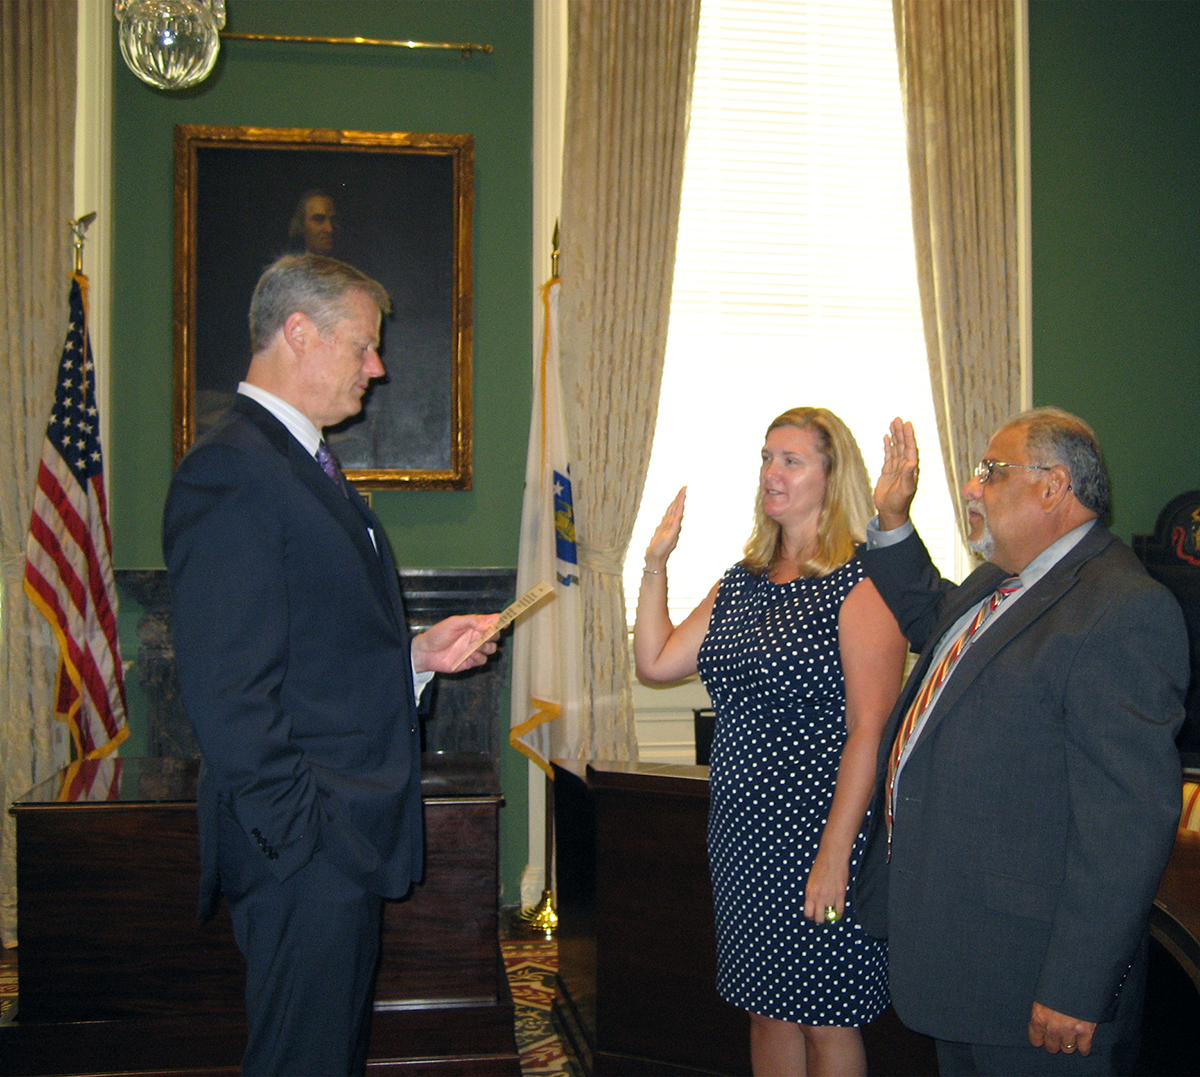 Governor Baker swears in Jennifer Wolowicz 
and Andrew Pappastergion